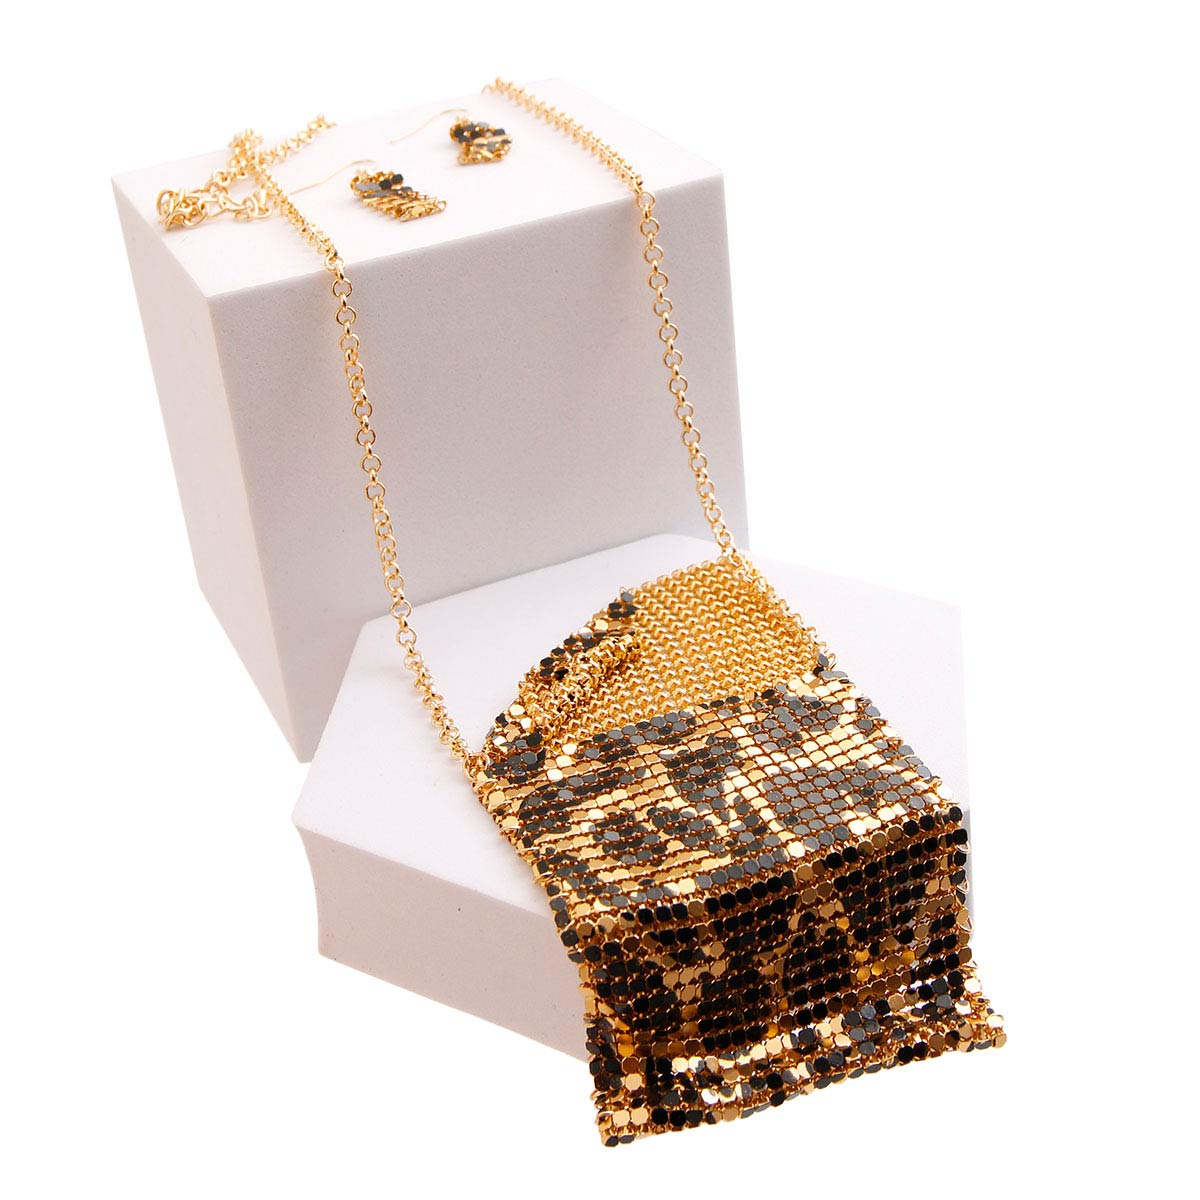 Leopard Chainmail Card Holder Necklace